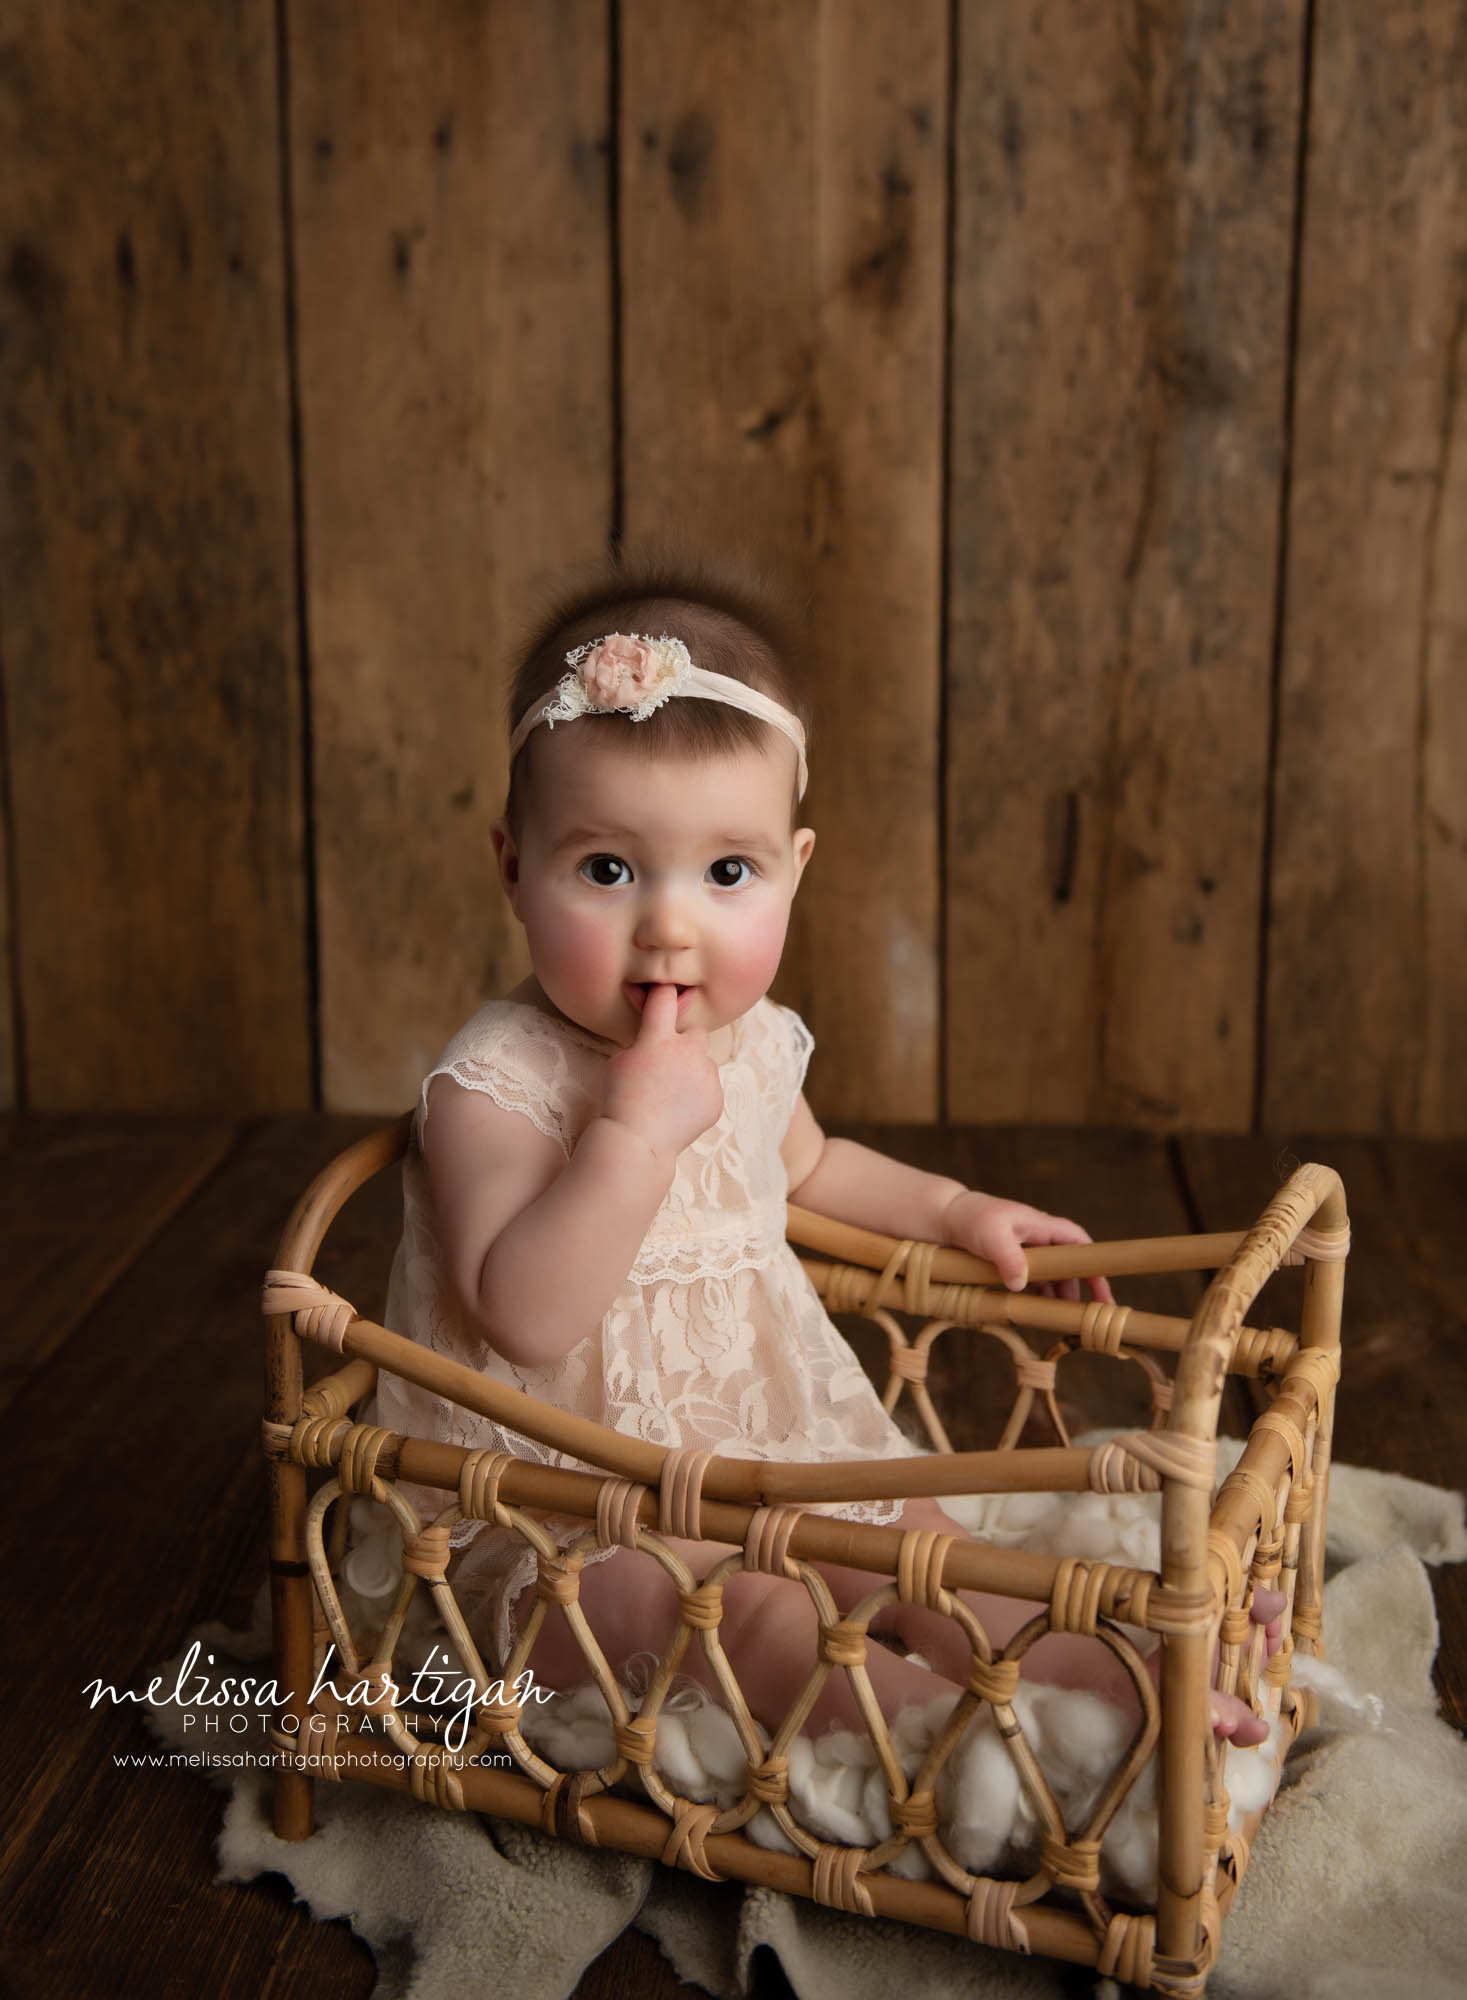 baby girl sitting in wicker basket prop in baby milestone photography session CT